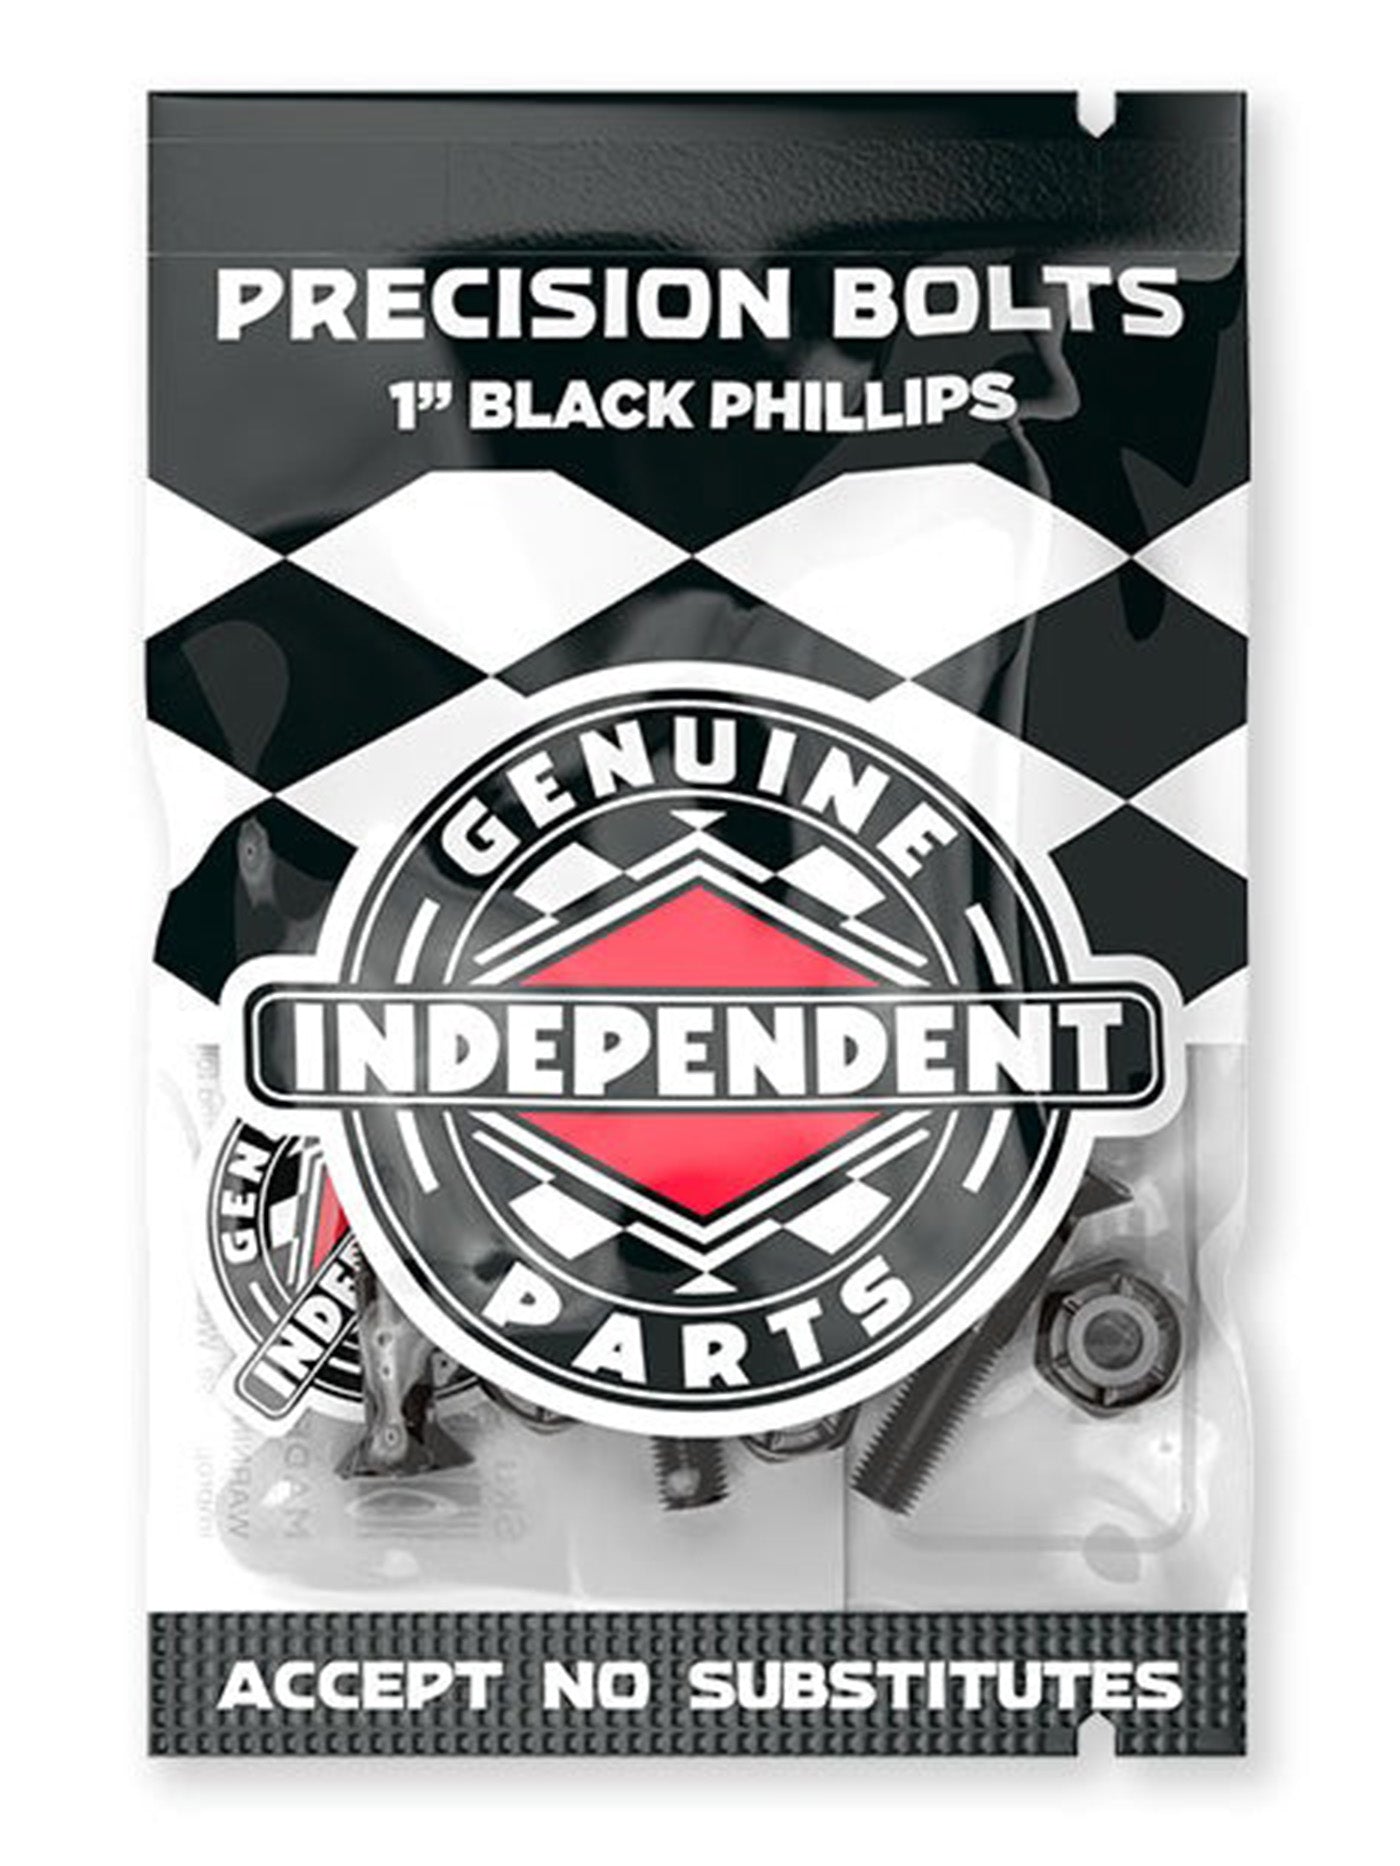 Independant Precision Phillips 1'' Bolts